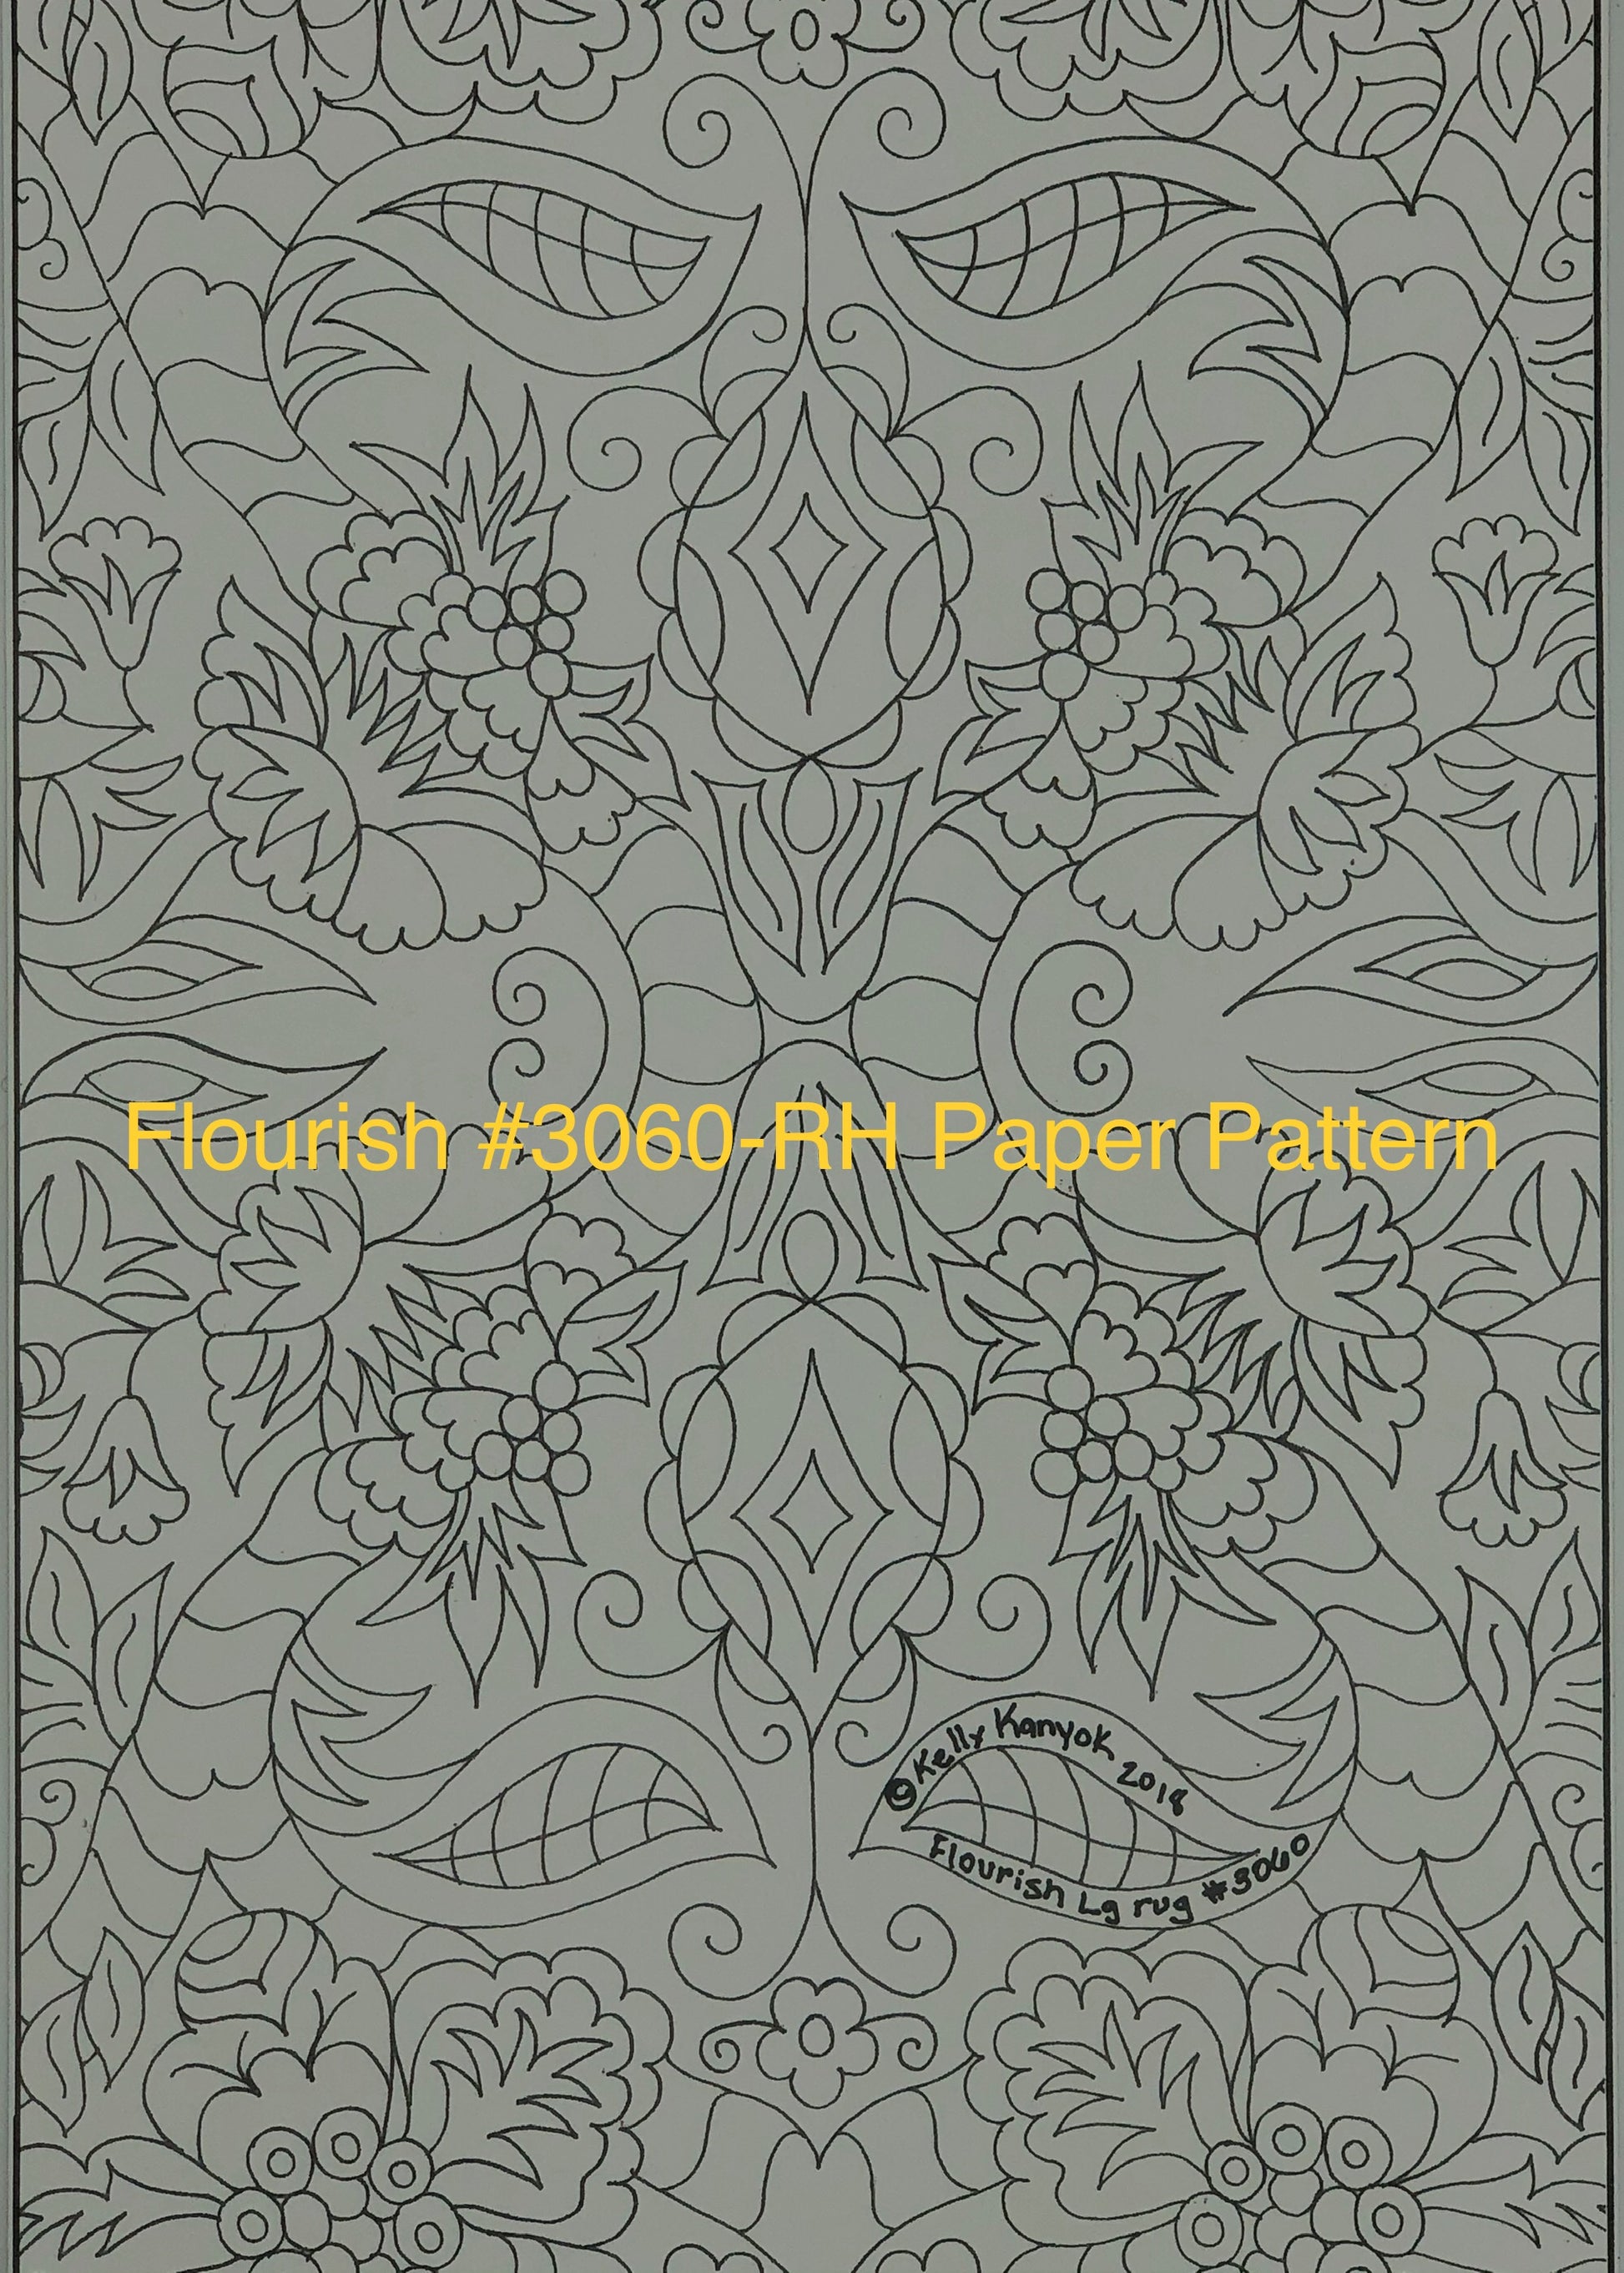 Flourish 3060- Rug Hooking pattern on Linen, Floral Design by Orphaned Wool